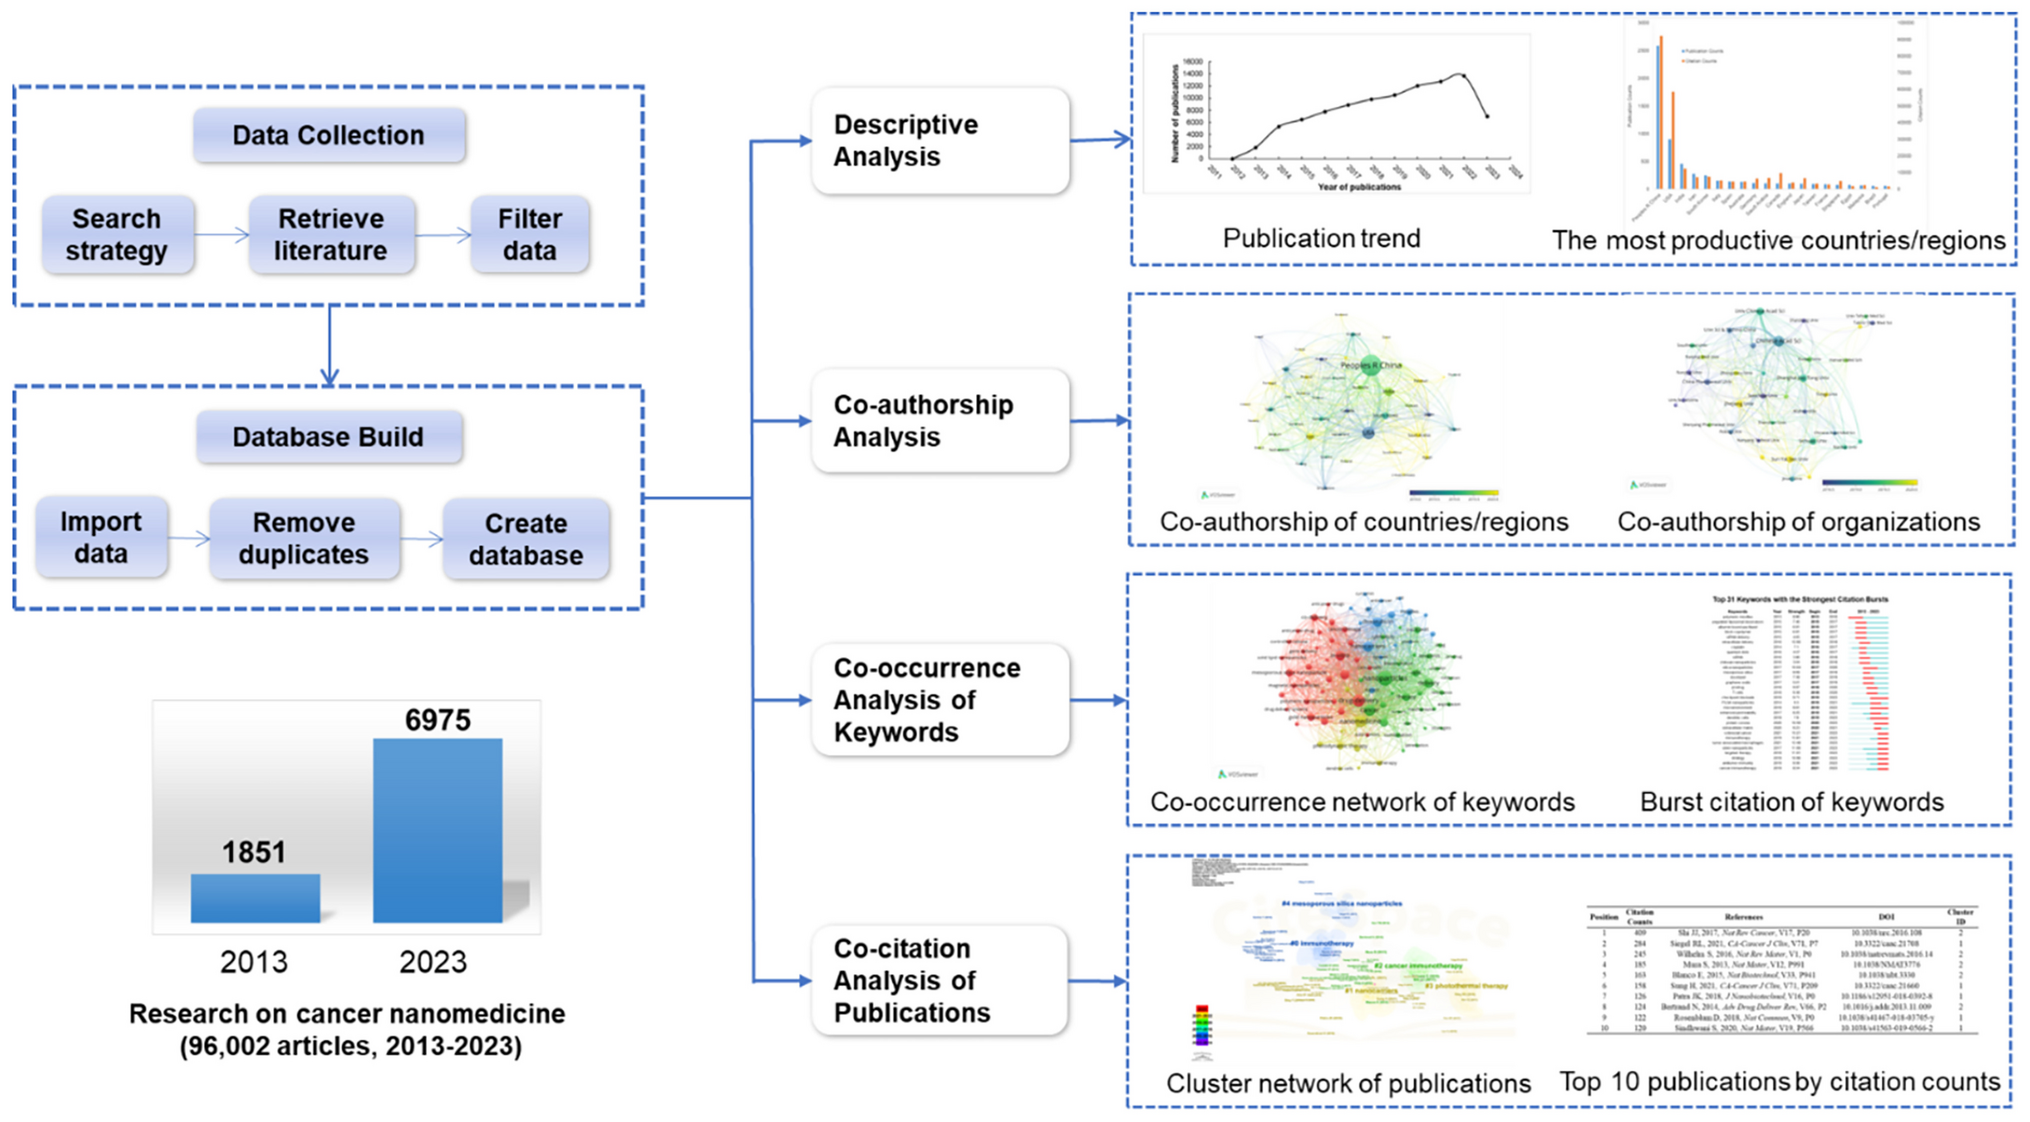 Bibliometric and visualized analysis of cancer nanomedicine from 2013 to 2023